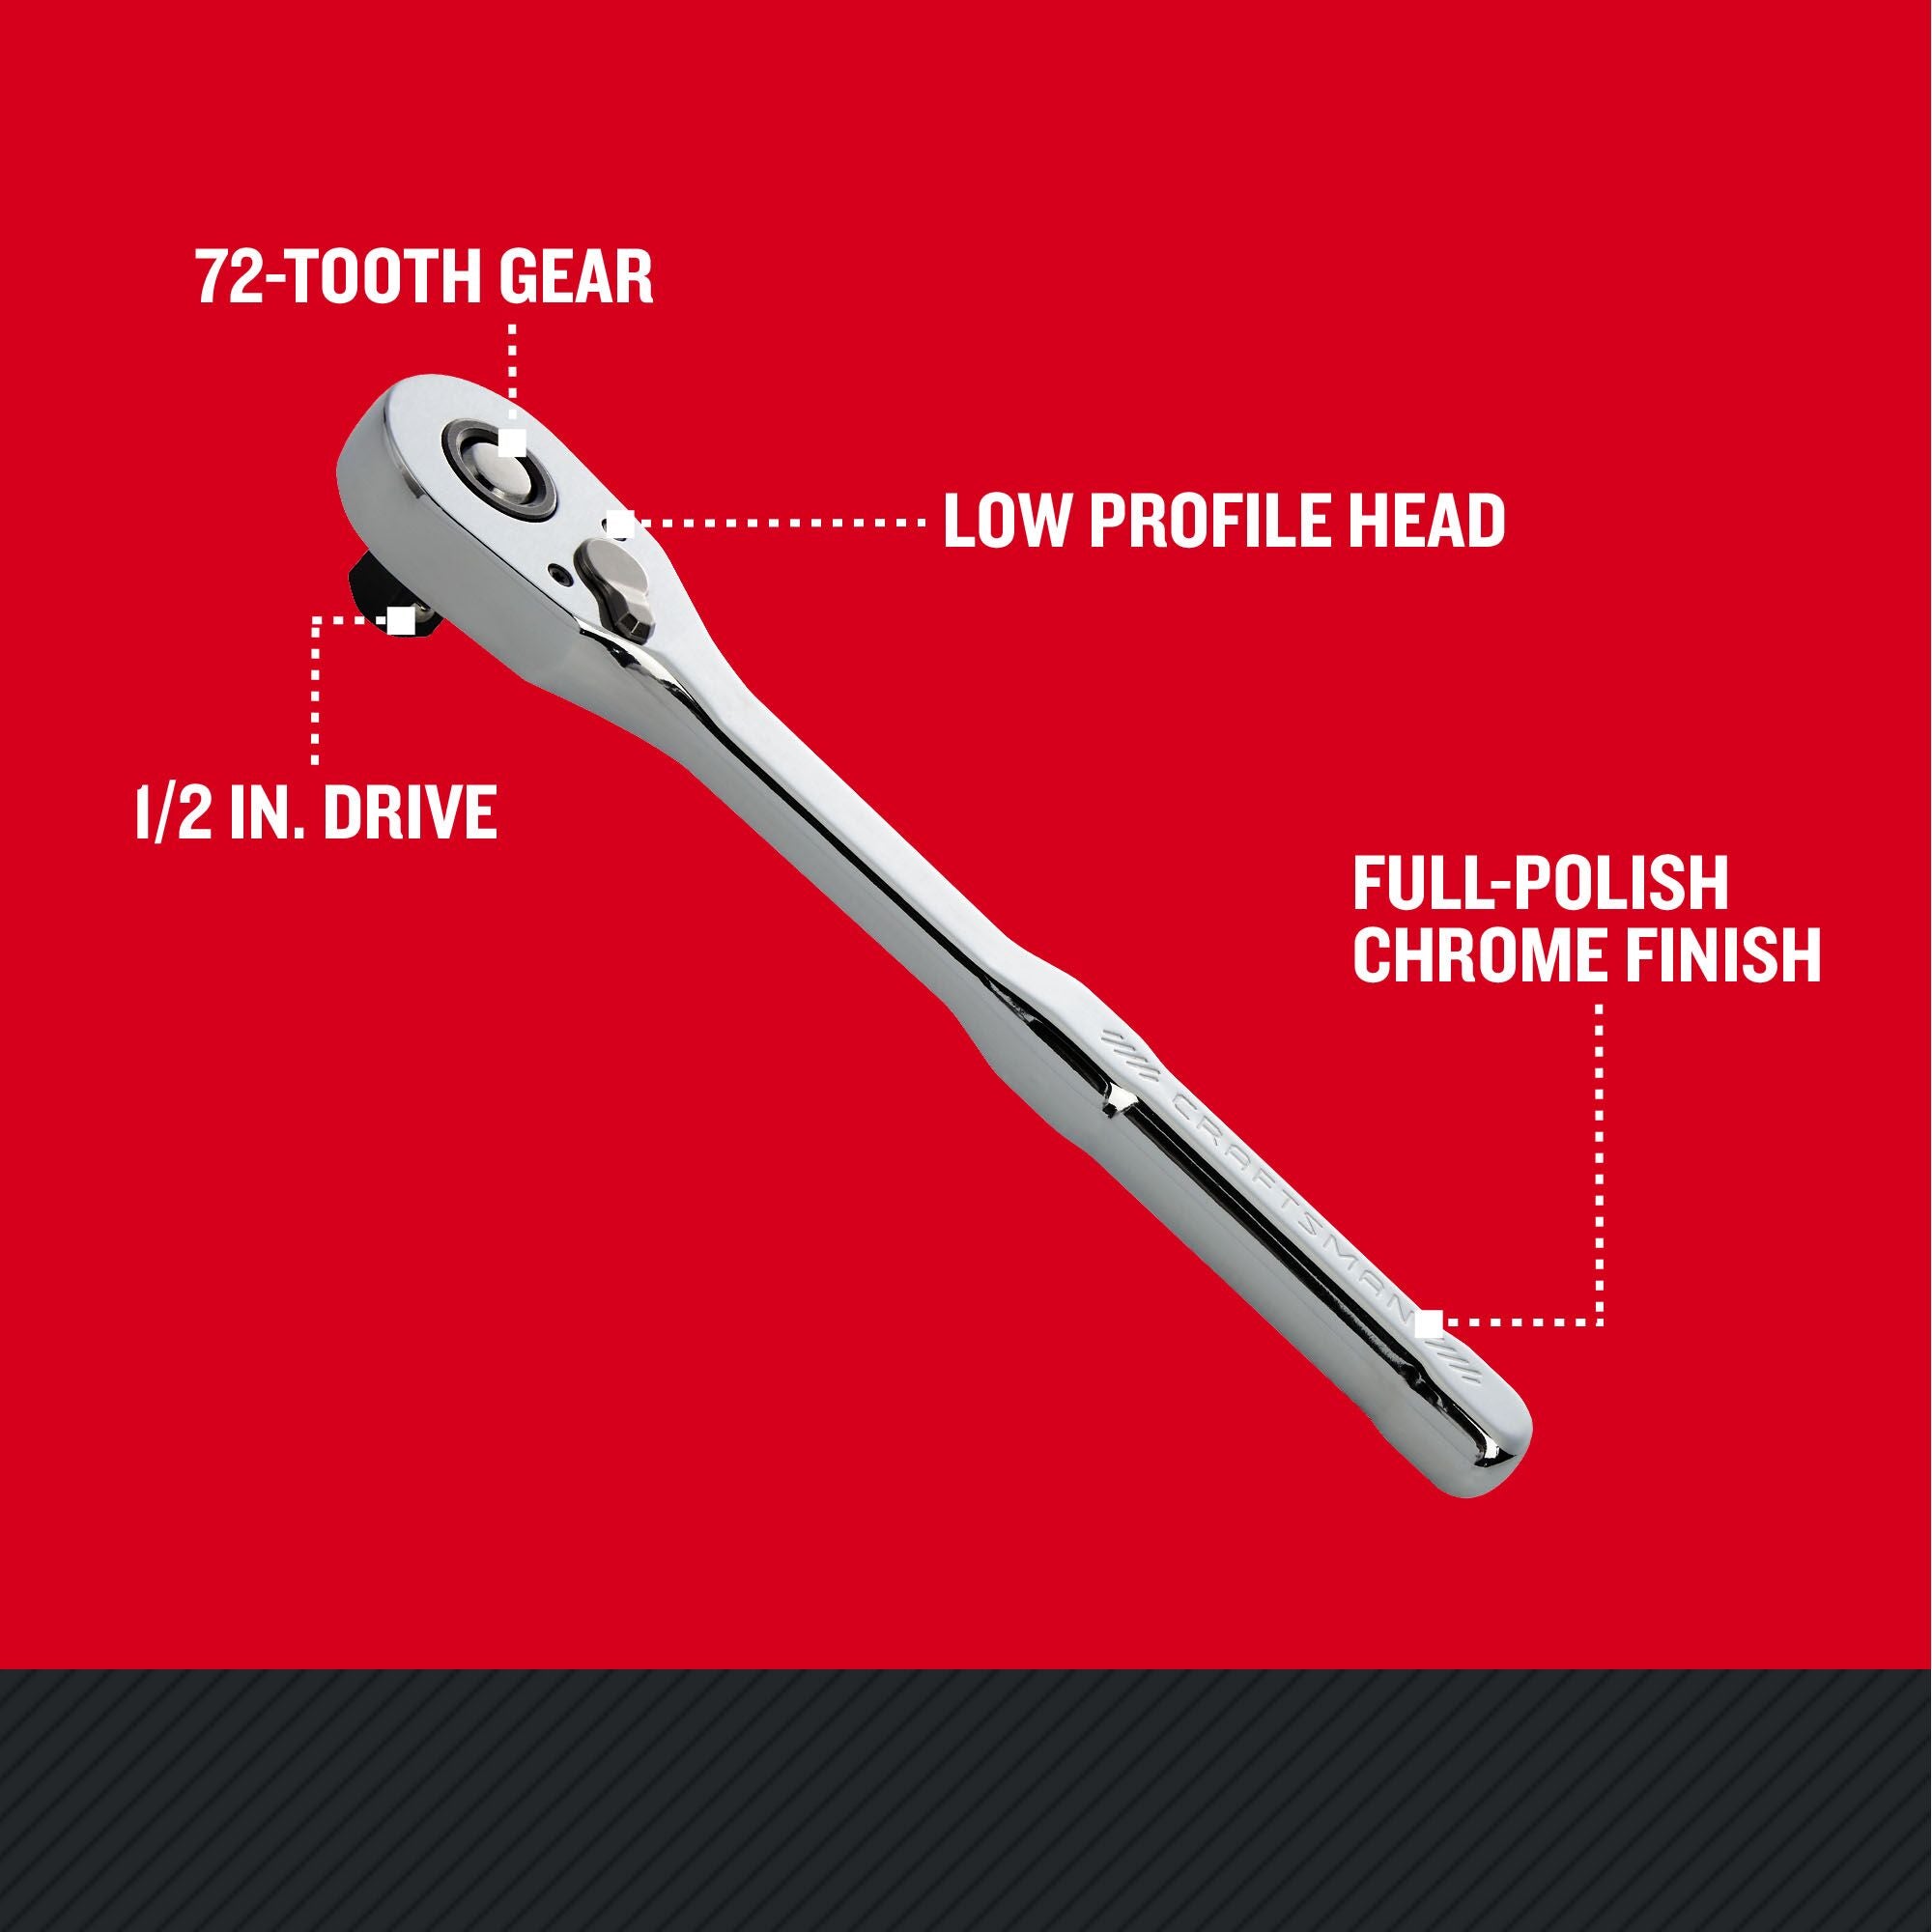 CRAFTSMAN Low Profile 1/2IN DRIVE 72 TOOTH PEAR HEAD RATCHET with features and benefits highlighted